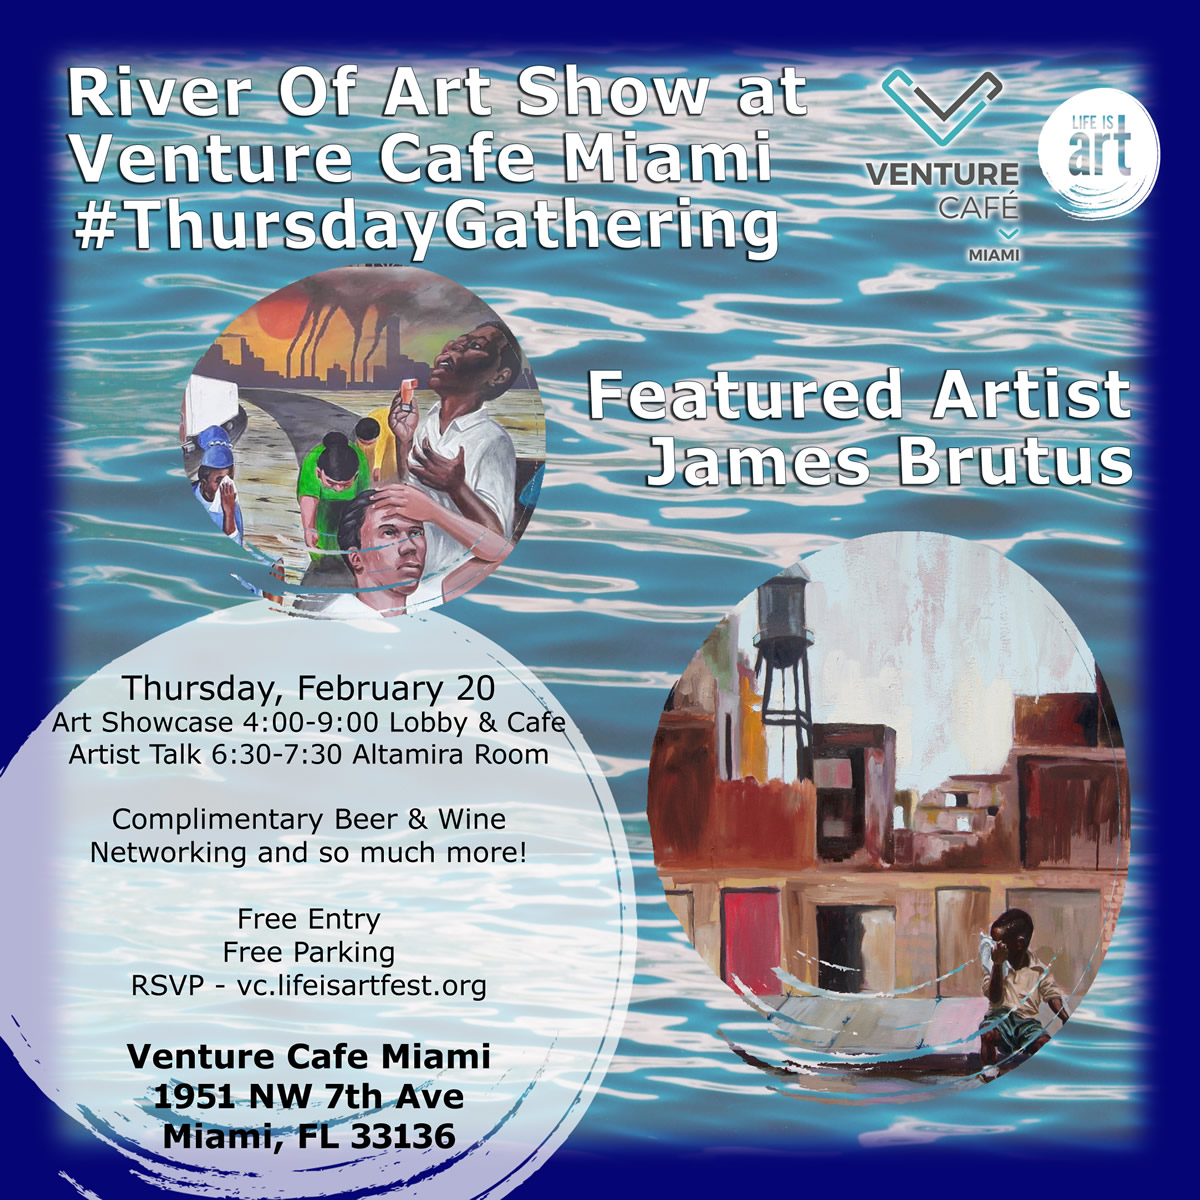 EVENT #133 River Of Art Show at Venture Café Miami #ThursdayGathering featuring James Brutus on February 20, 2020